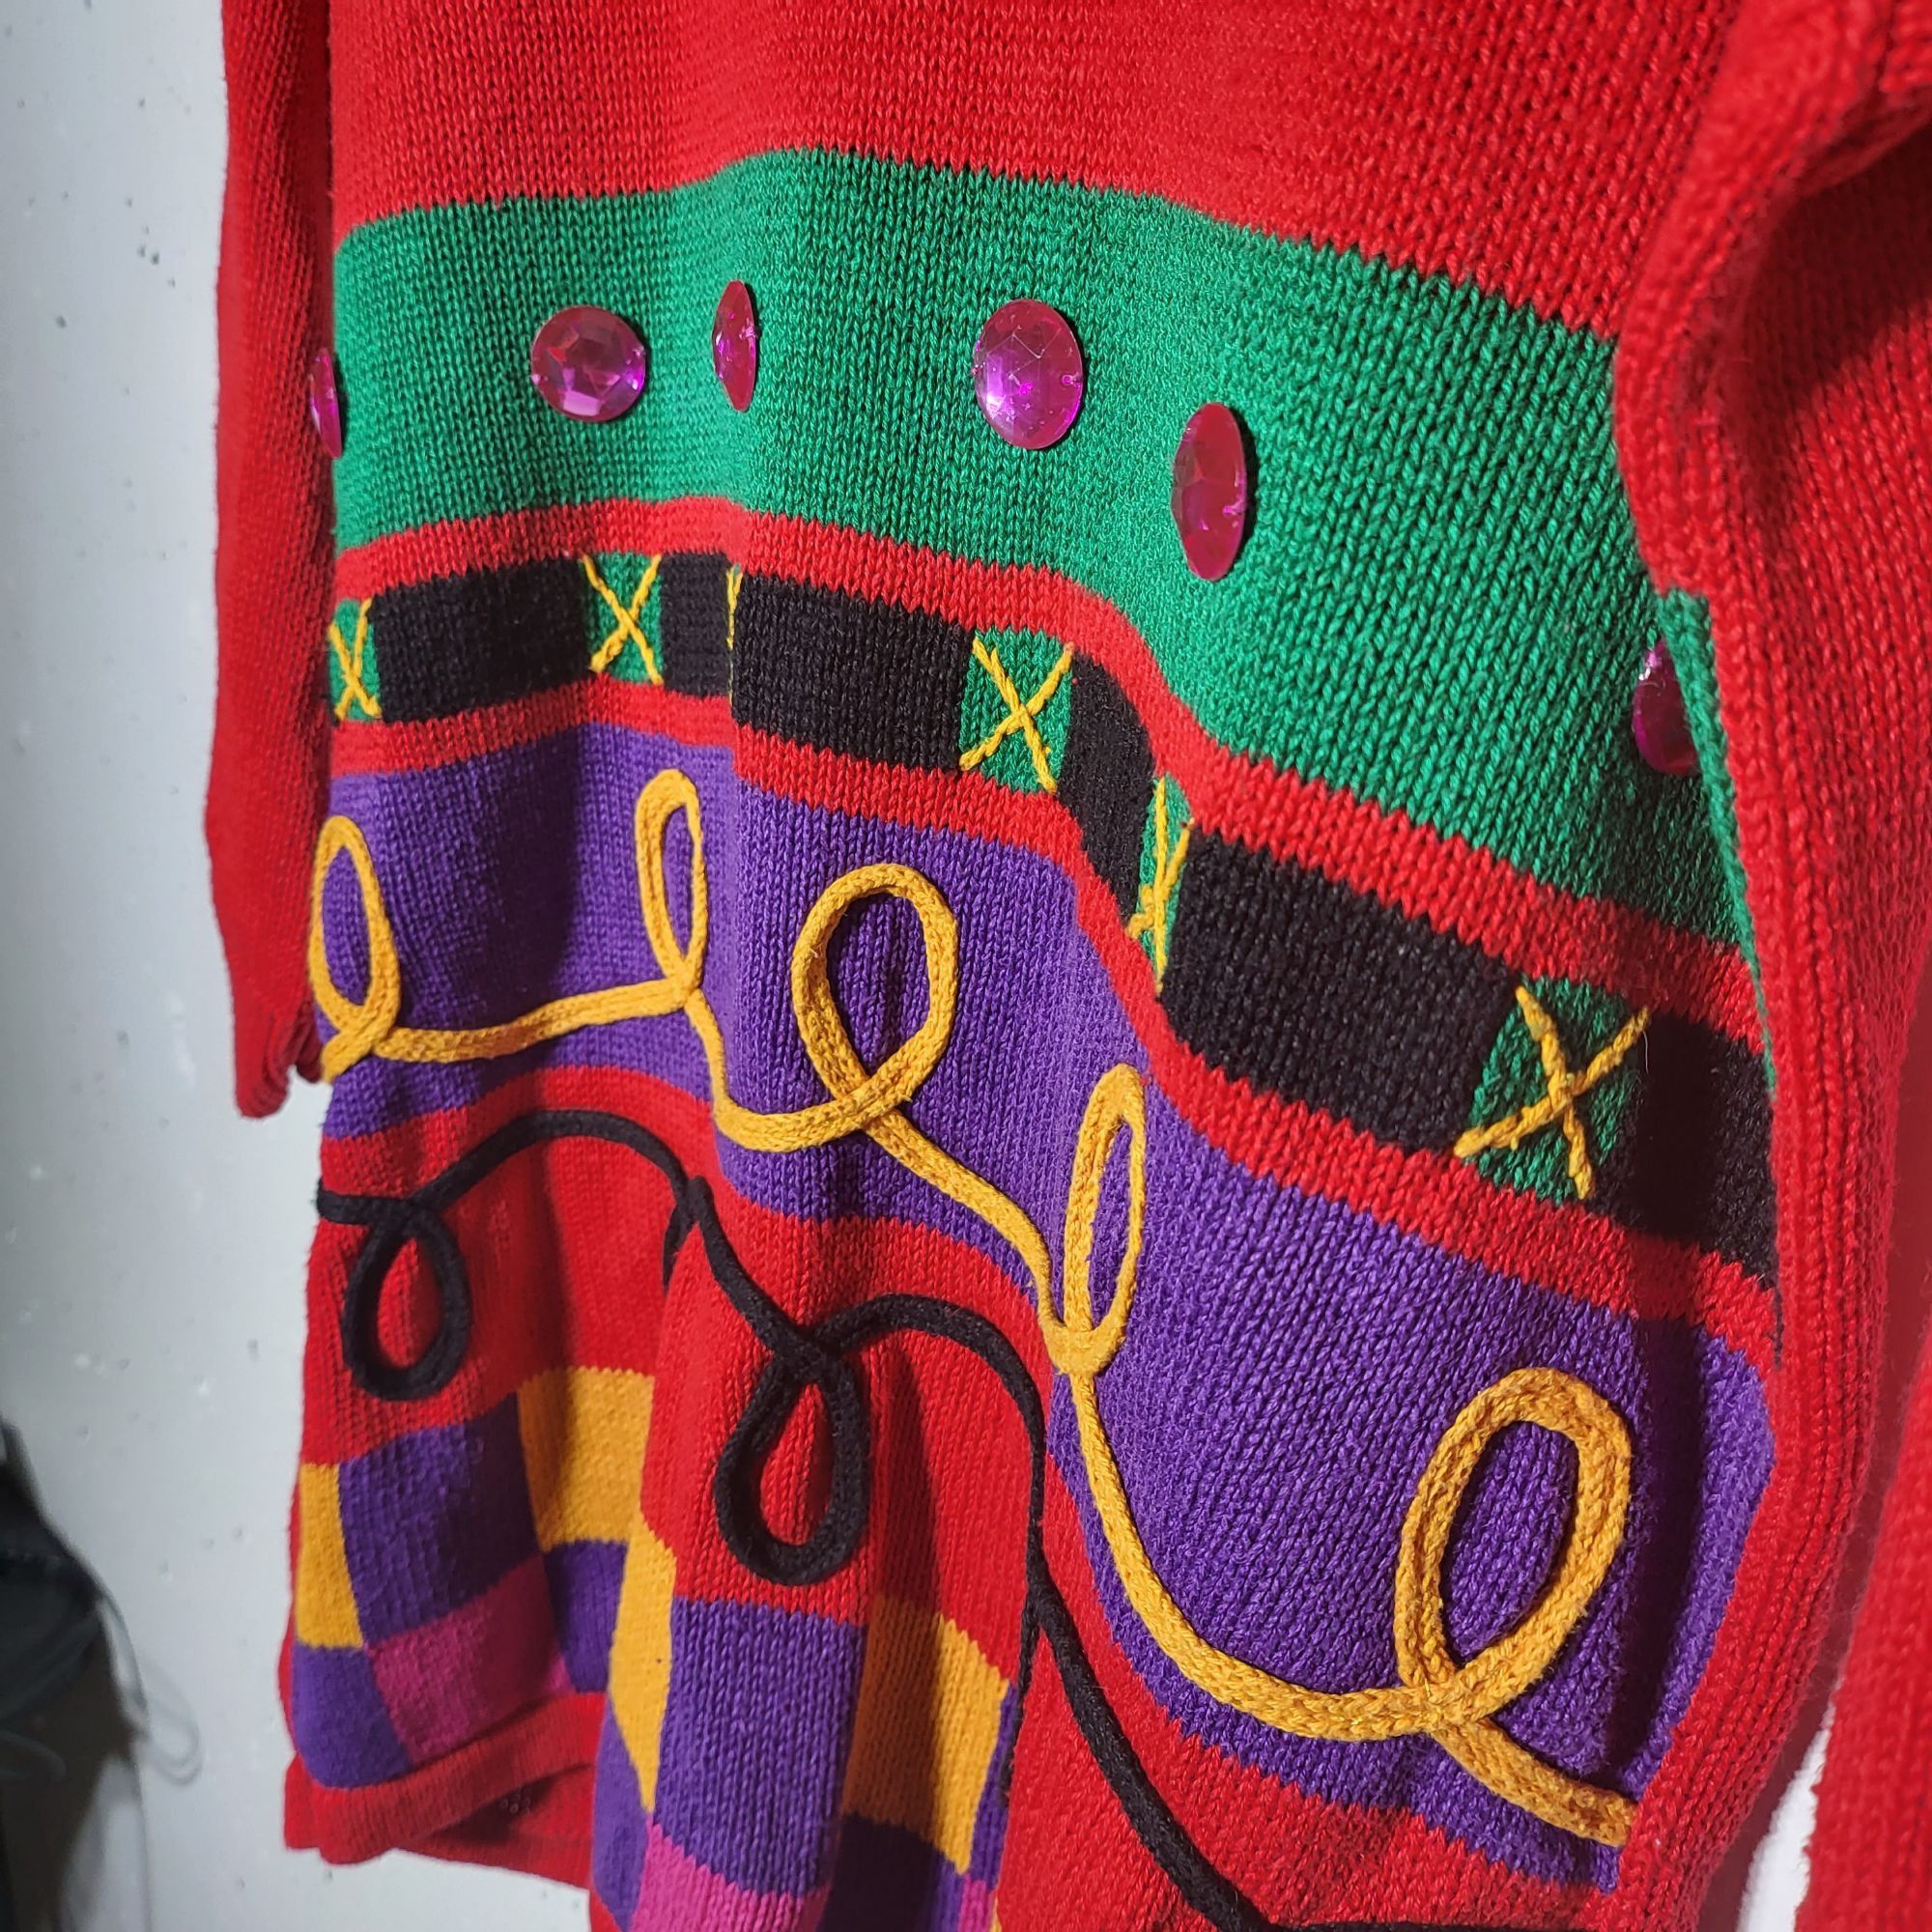 Vintage Vintage P Galli Colorful Abstract Art Sweater Red Womens M Size M / US 6-8 / IT 42-44 - 3 Thumbnail